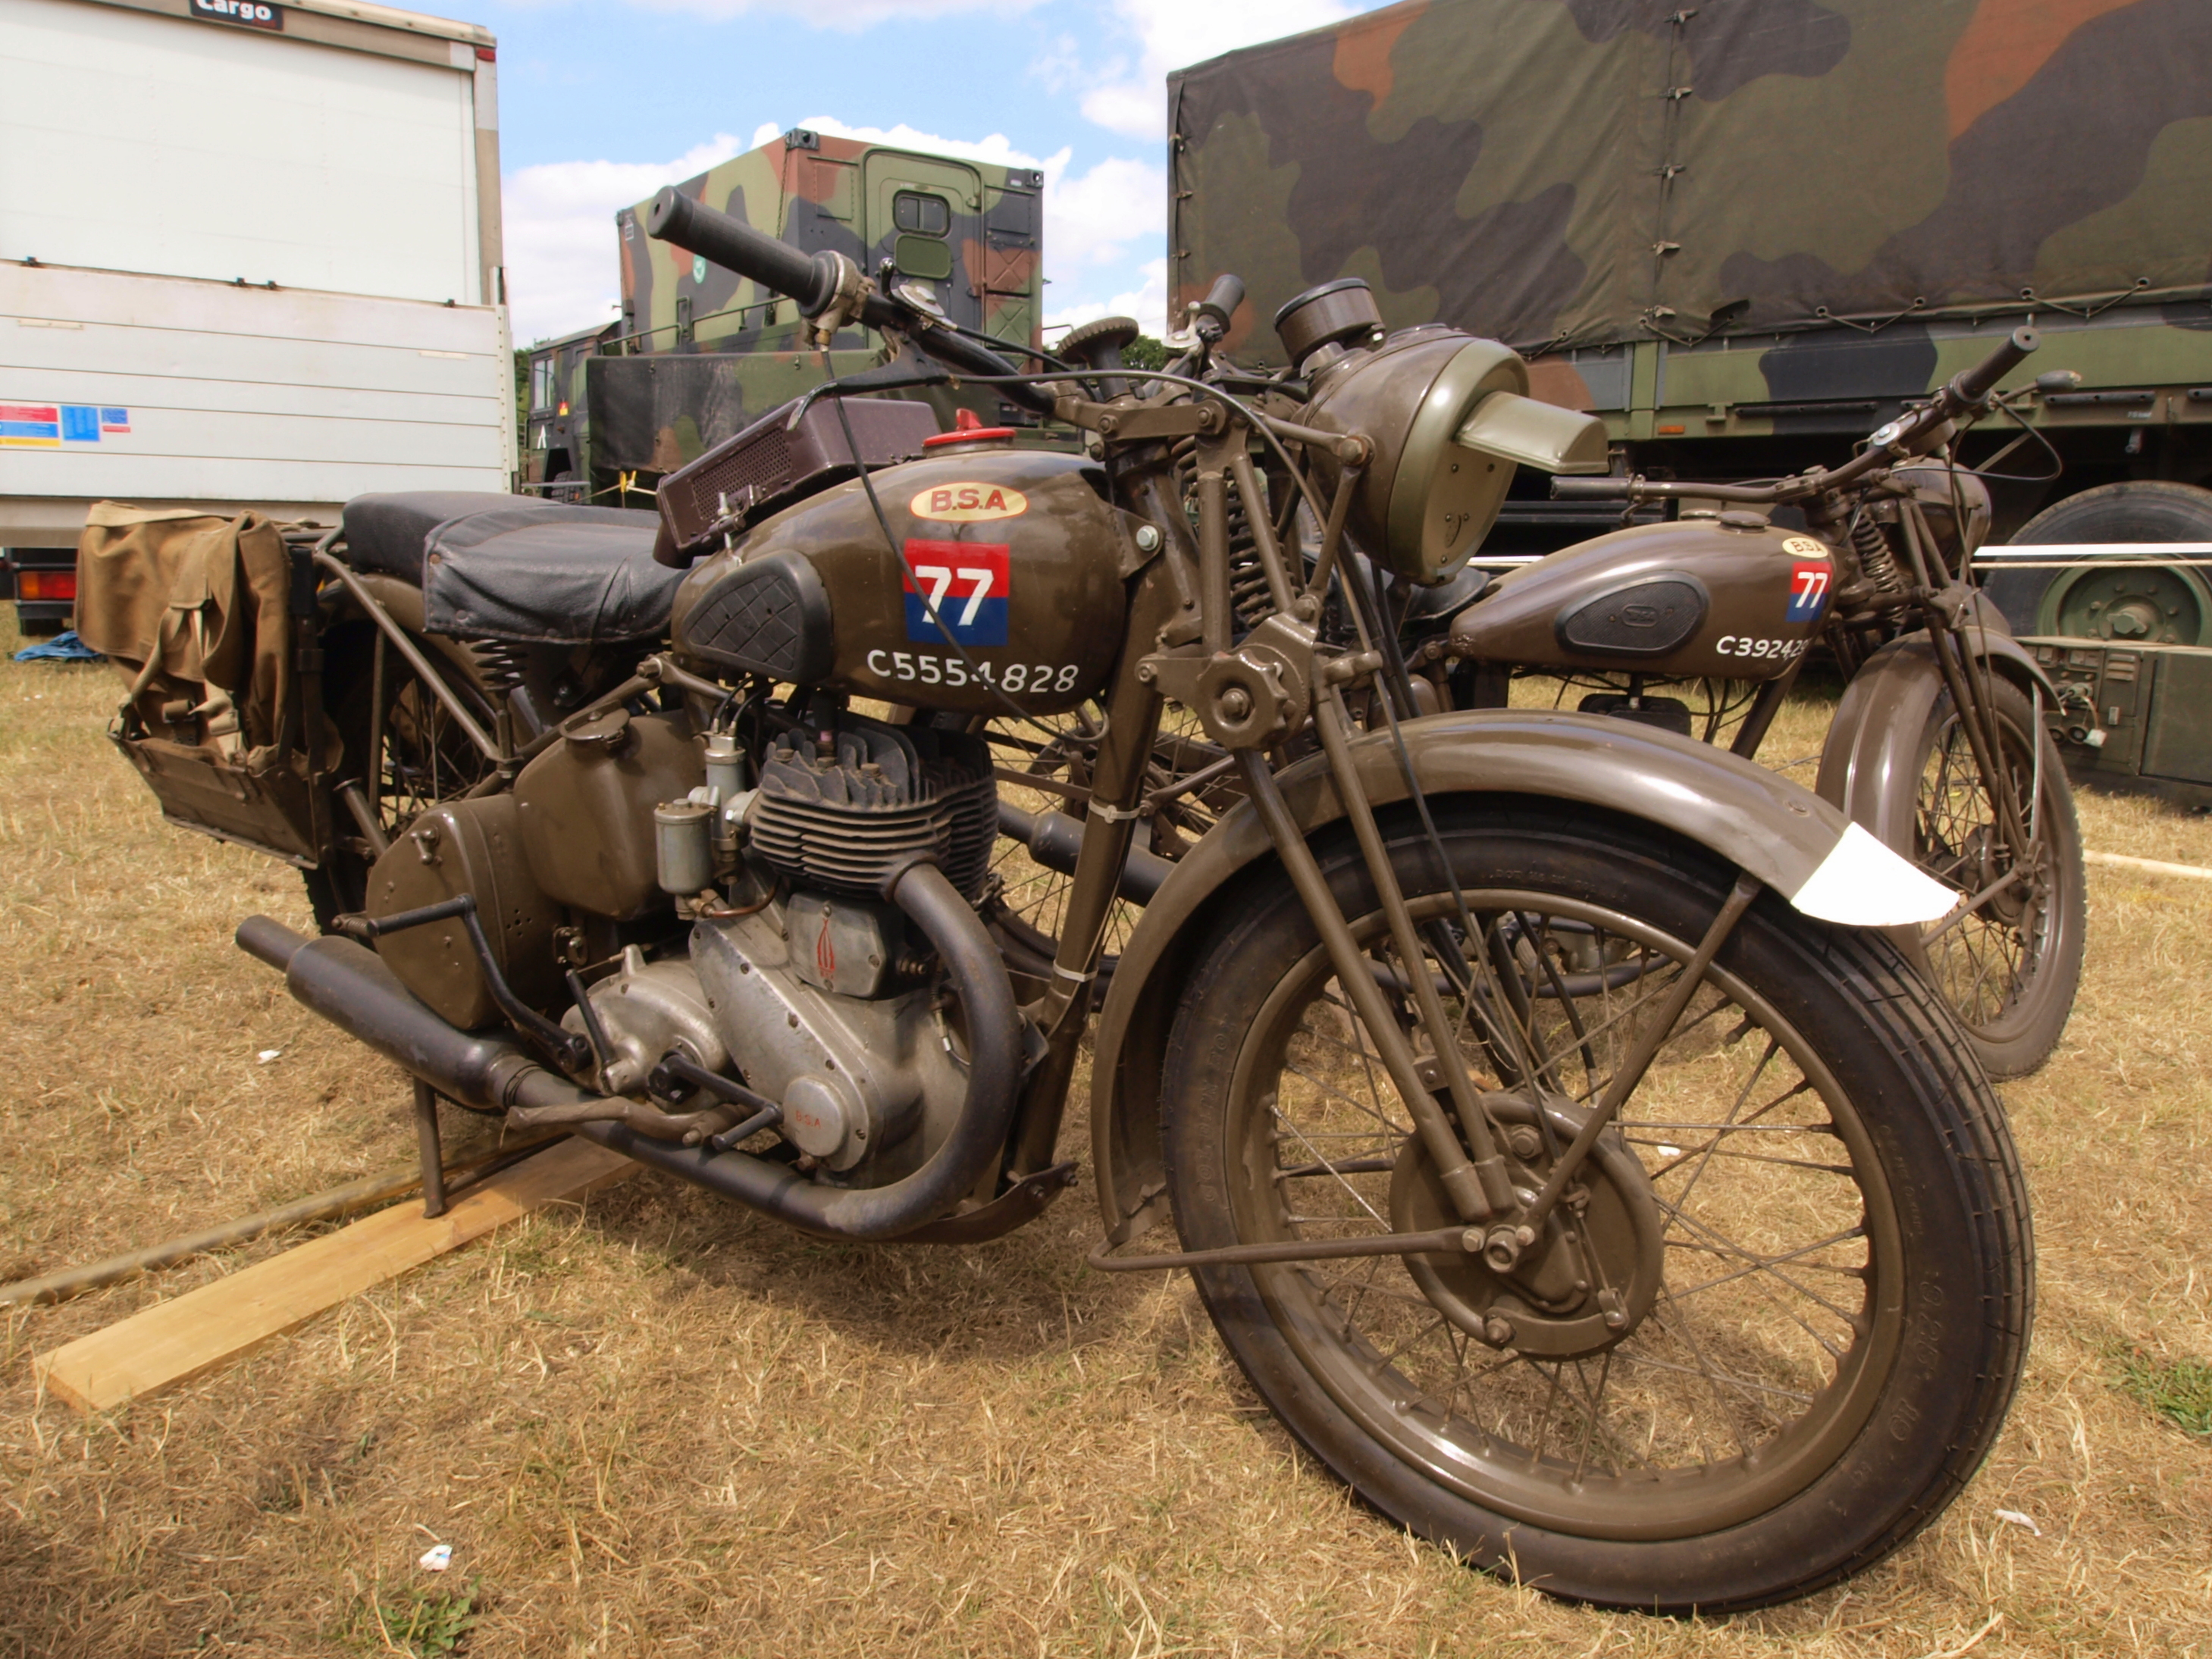 File:Old military BSA motorcycle, C5554828, pic1.JPG - Wikimedia Commons